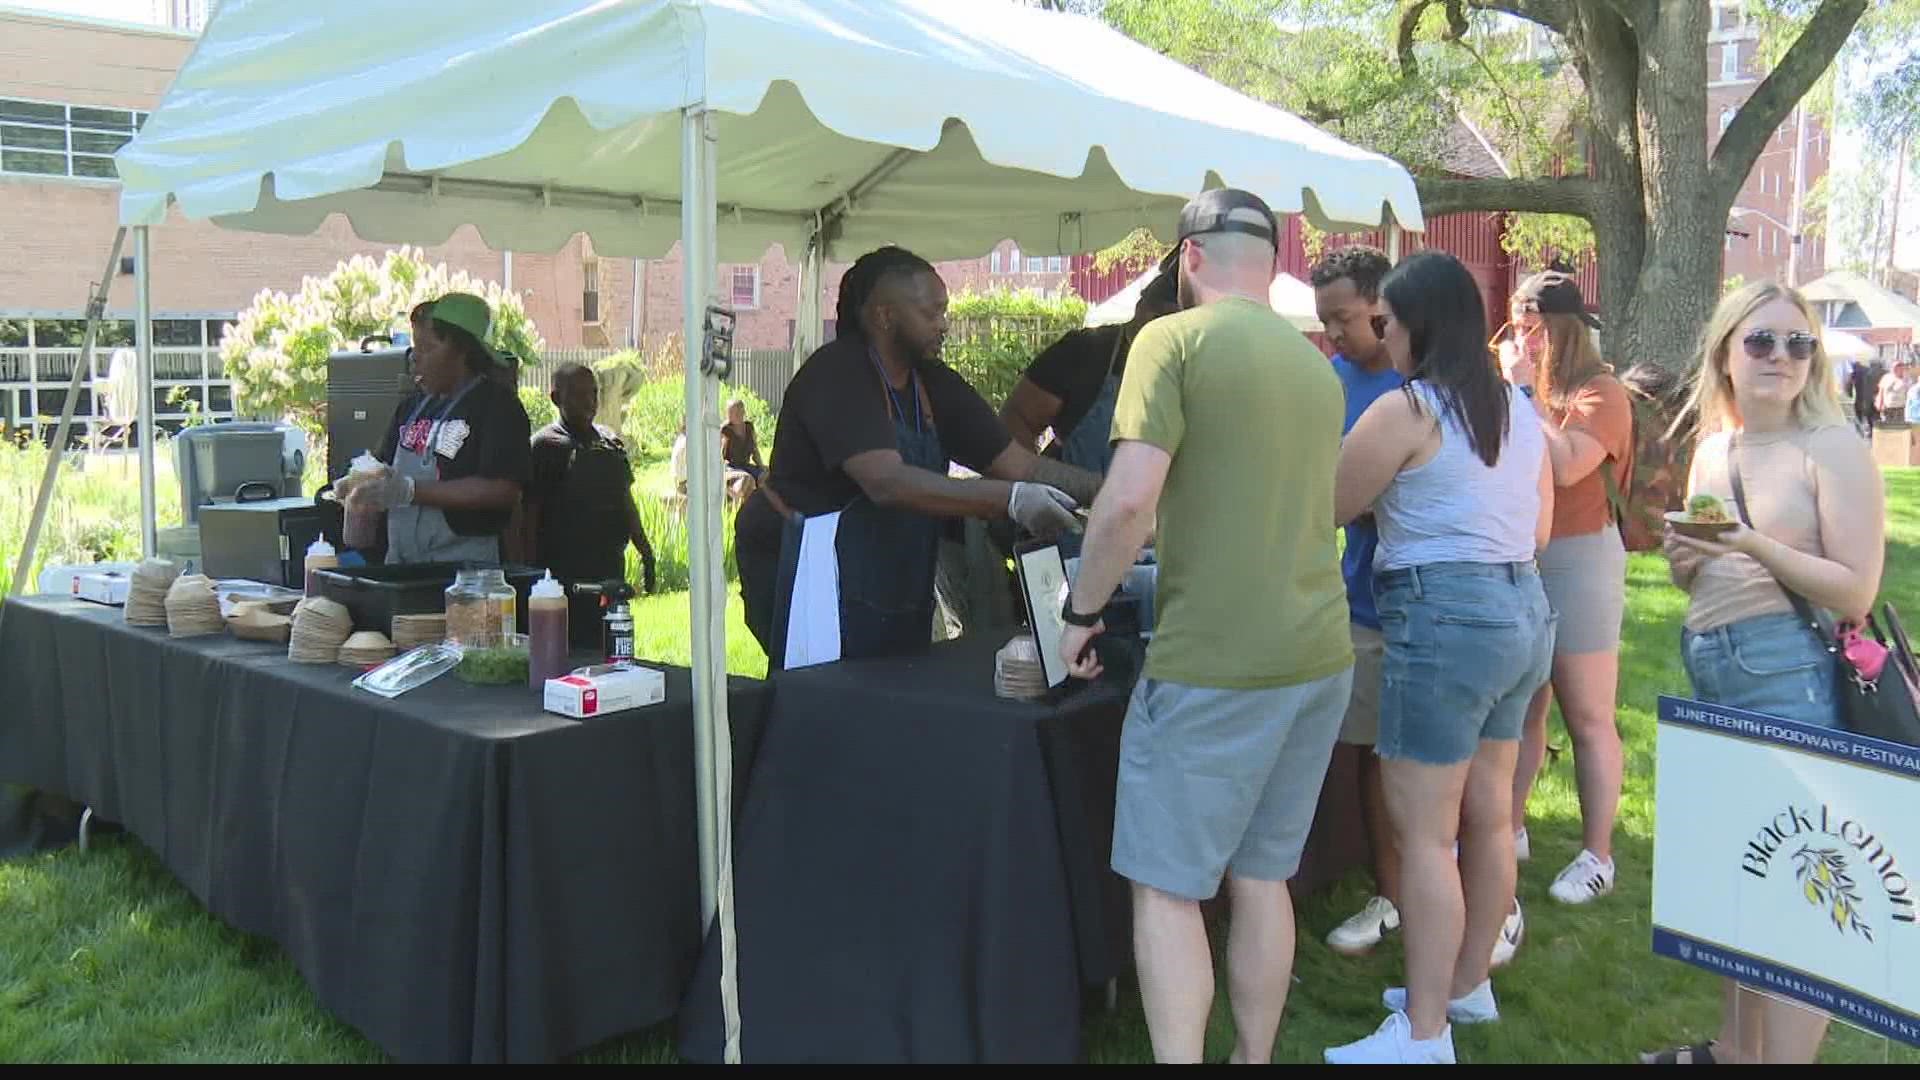 The festival featured more than 20 black-owned restaurants, vendors, and caterers.